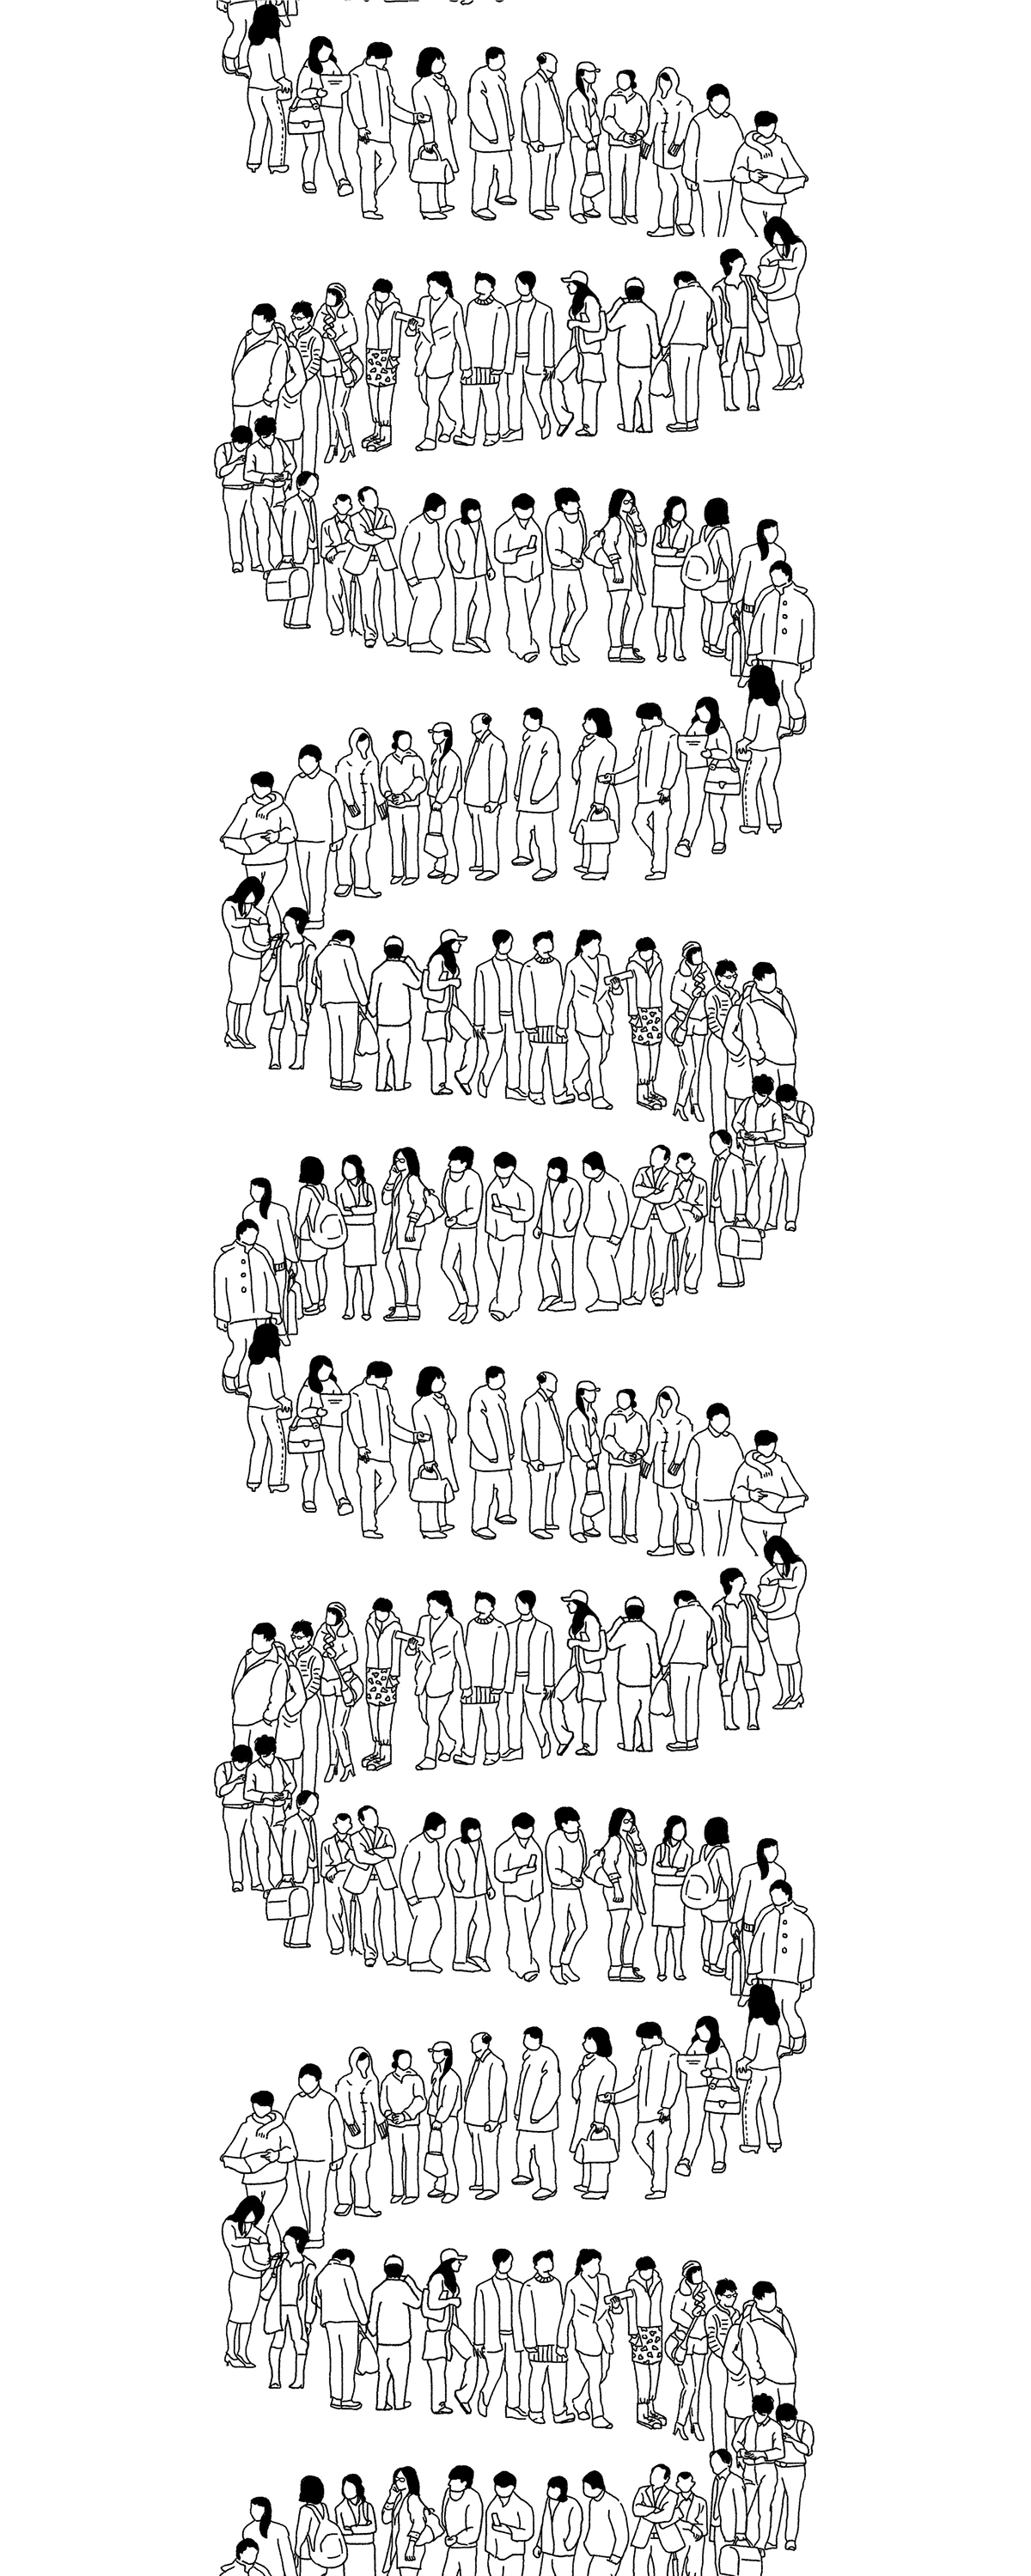 chinese culture everyday ILLUSTRATION  pattern handdrawing city people blackandwhite